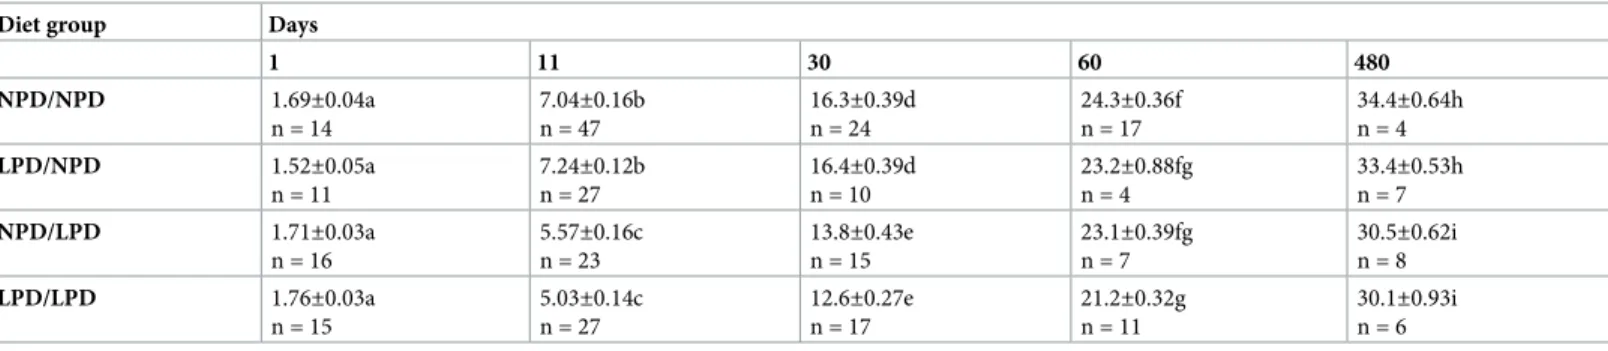 Table 2. Weight of mice at different time-points.